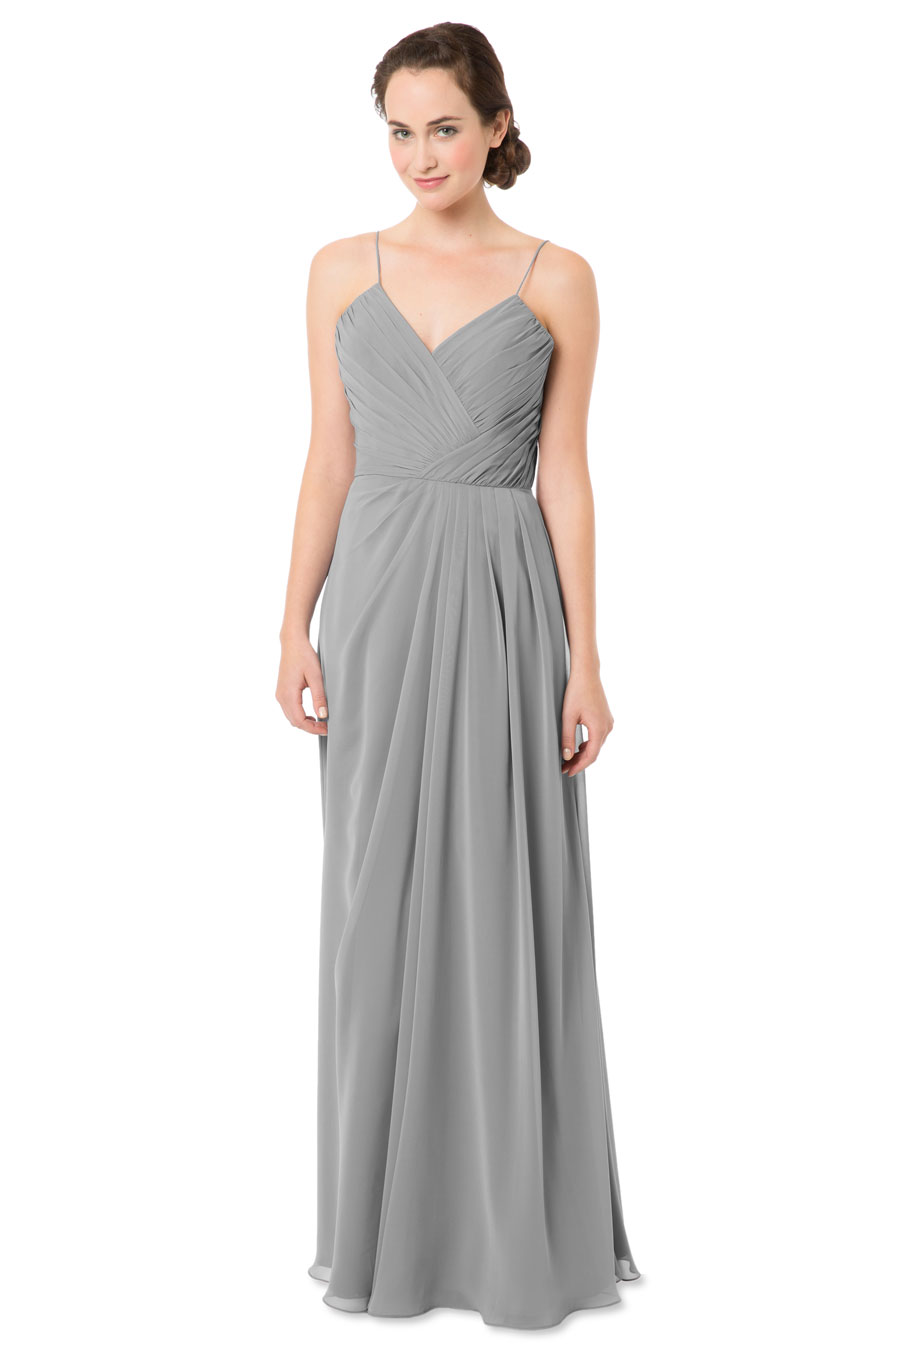 STYLE: 548 | Bridesmaid Dresses, Evening Gowns & Flower Girl Dresses ...